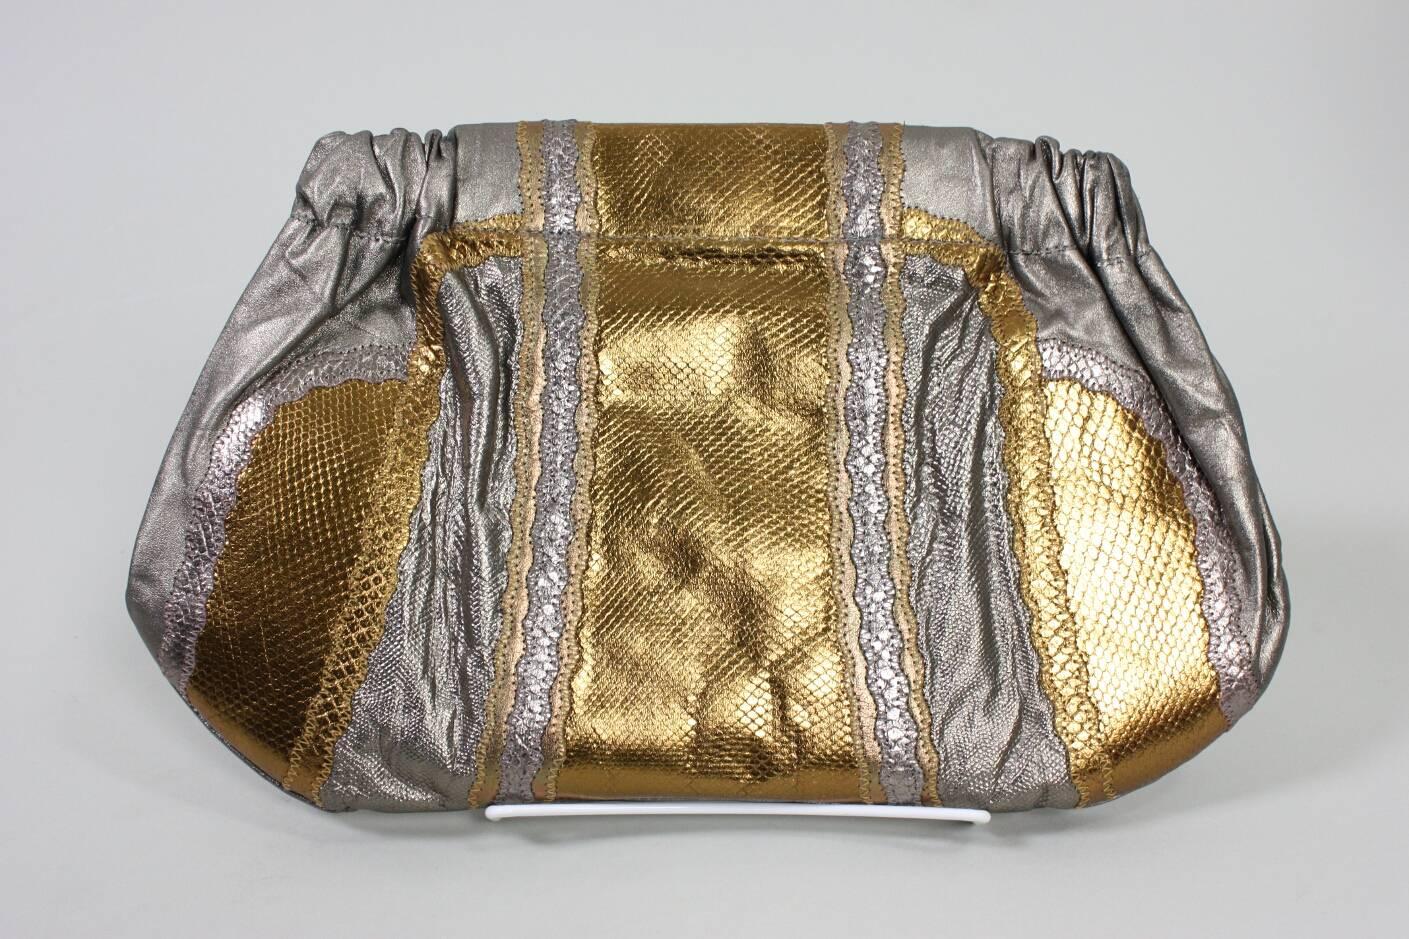 Vintage handbag from Carlos Falchi dates to the 1980's and is made of various types of skins with a metallic finish.  Narrow strap can either be worn over the shoulder or tucked away and the handbag used as a clutch.  Interior zipped pocket. Moire